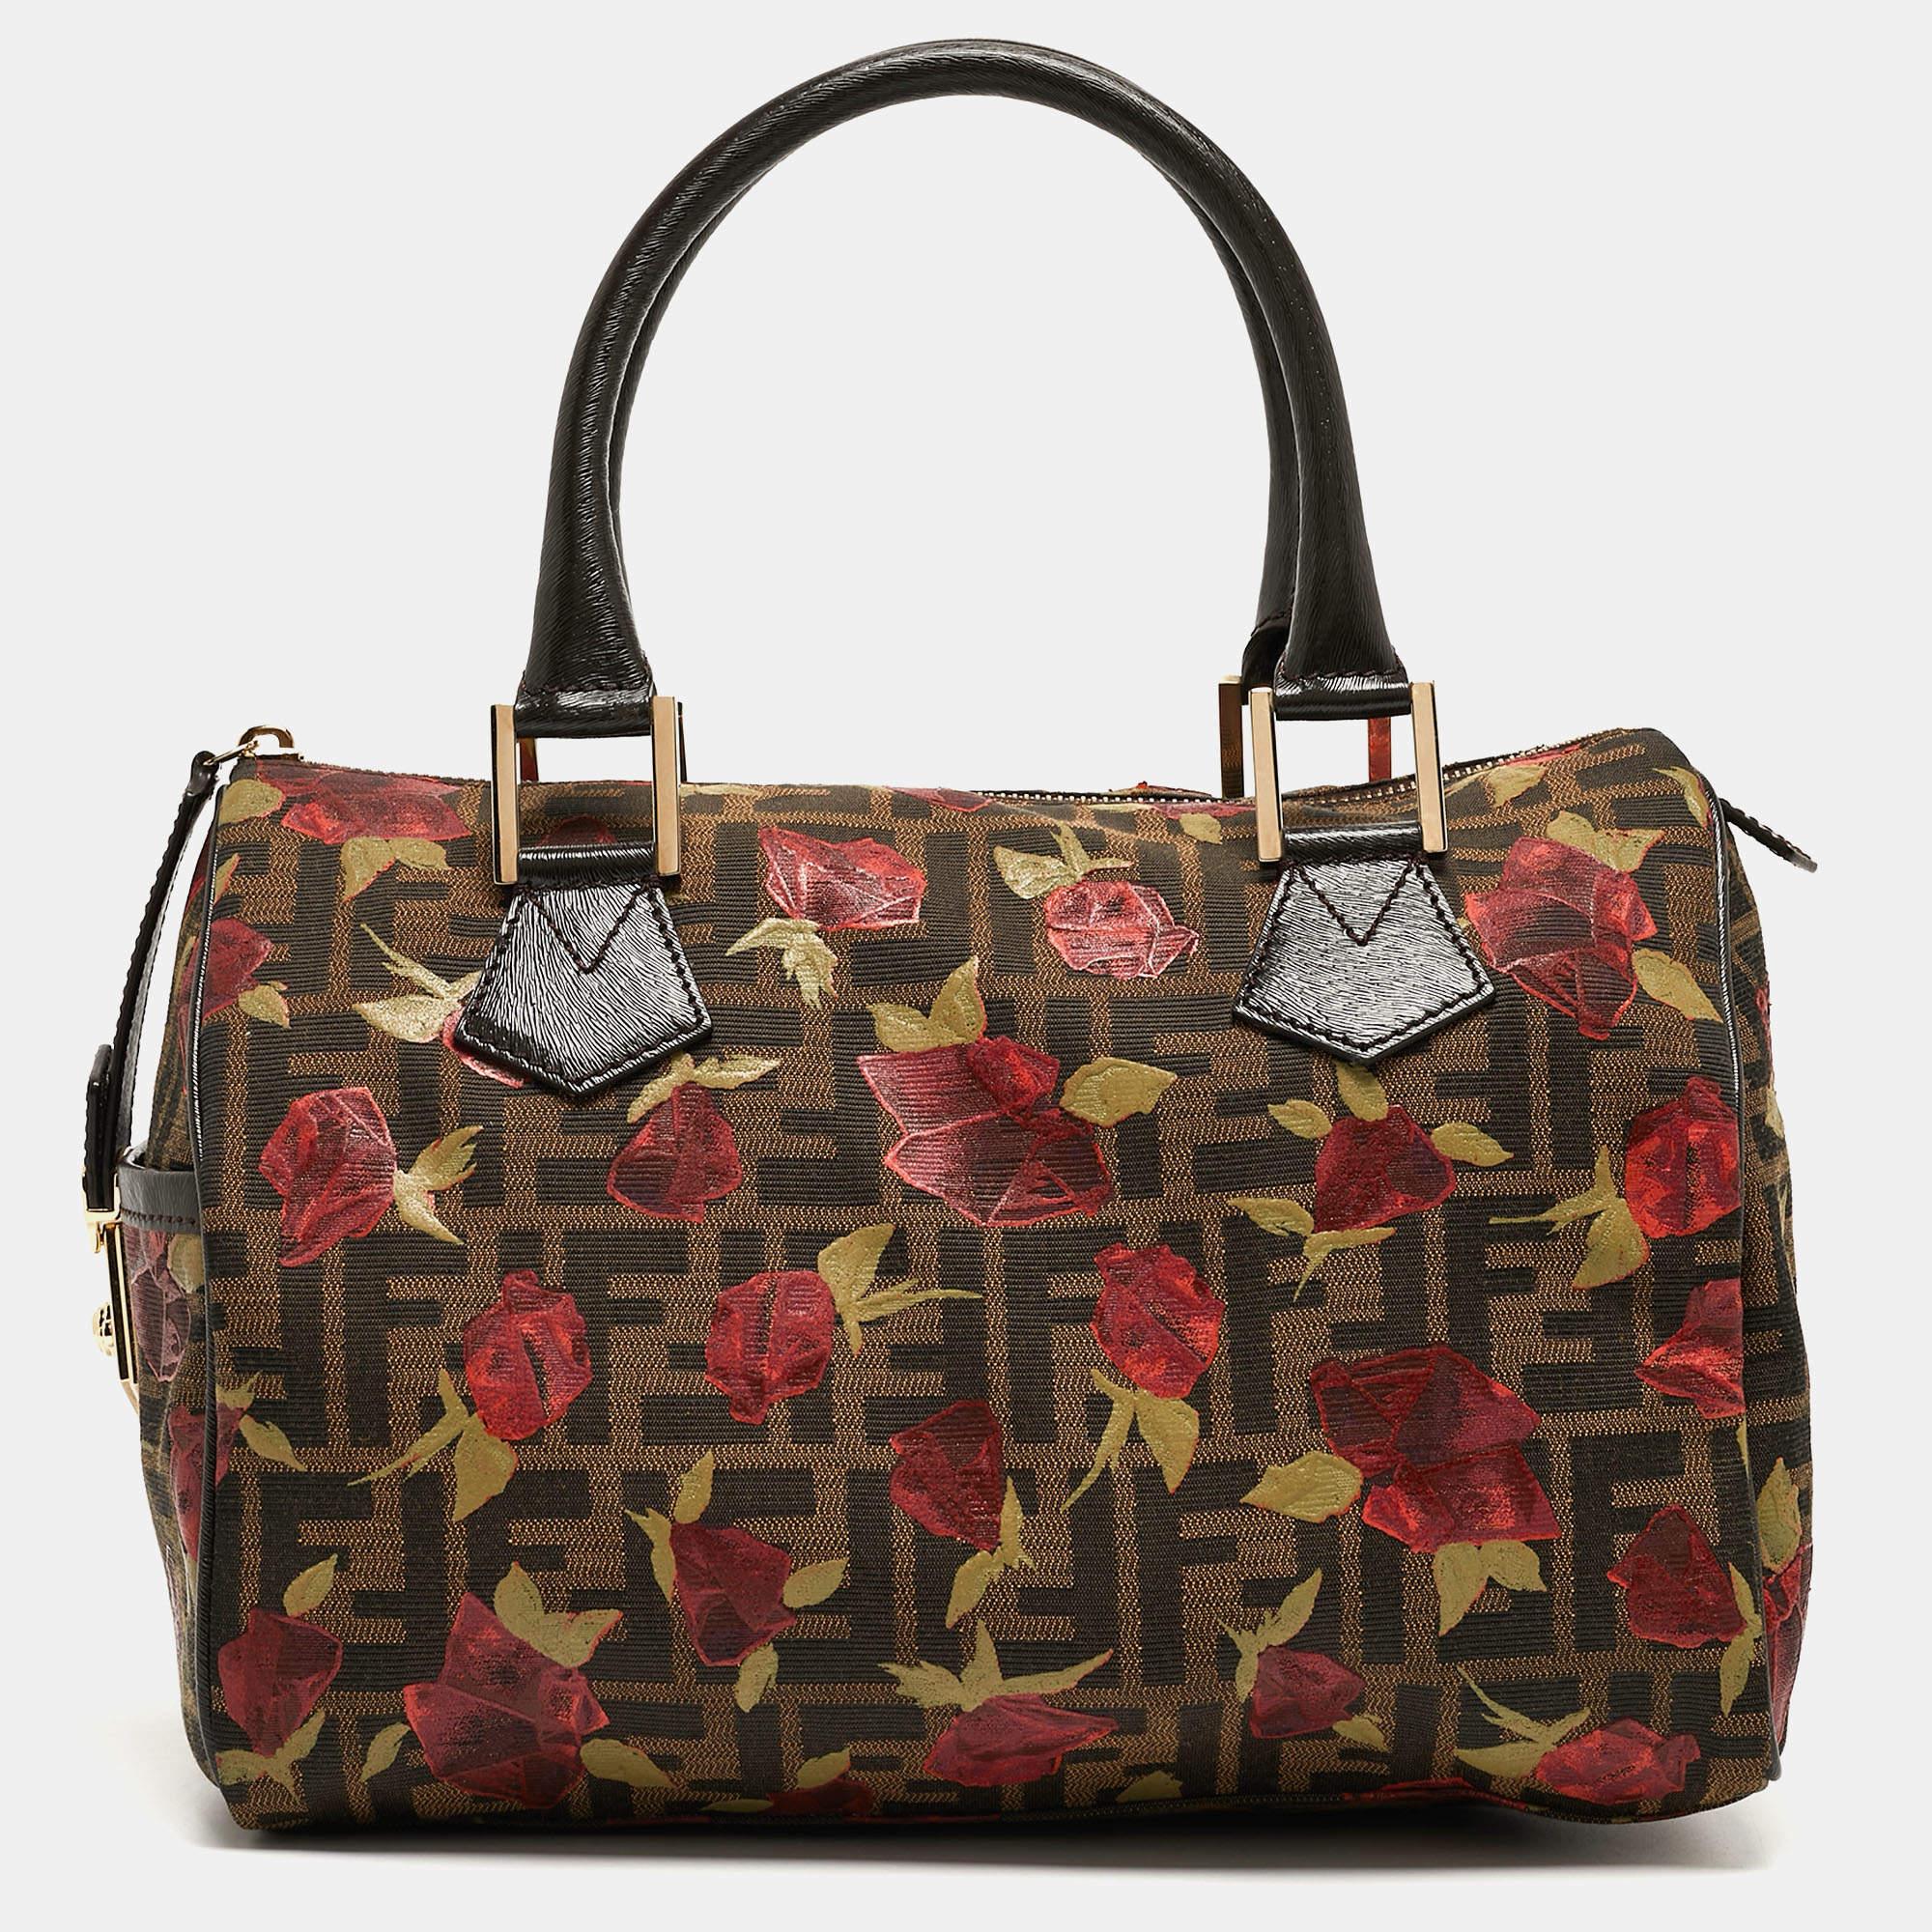 This Zucca Chef medium Boston will remain forever chic. Crafted from Fendi’s classic Tobacco Zucca canvas with rose prints and patent leather trim, the exterior is accented with a unique zip keeper. The interior is lined with fabric and has enough